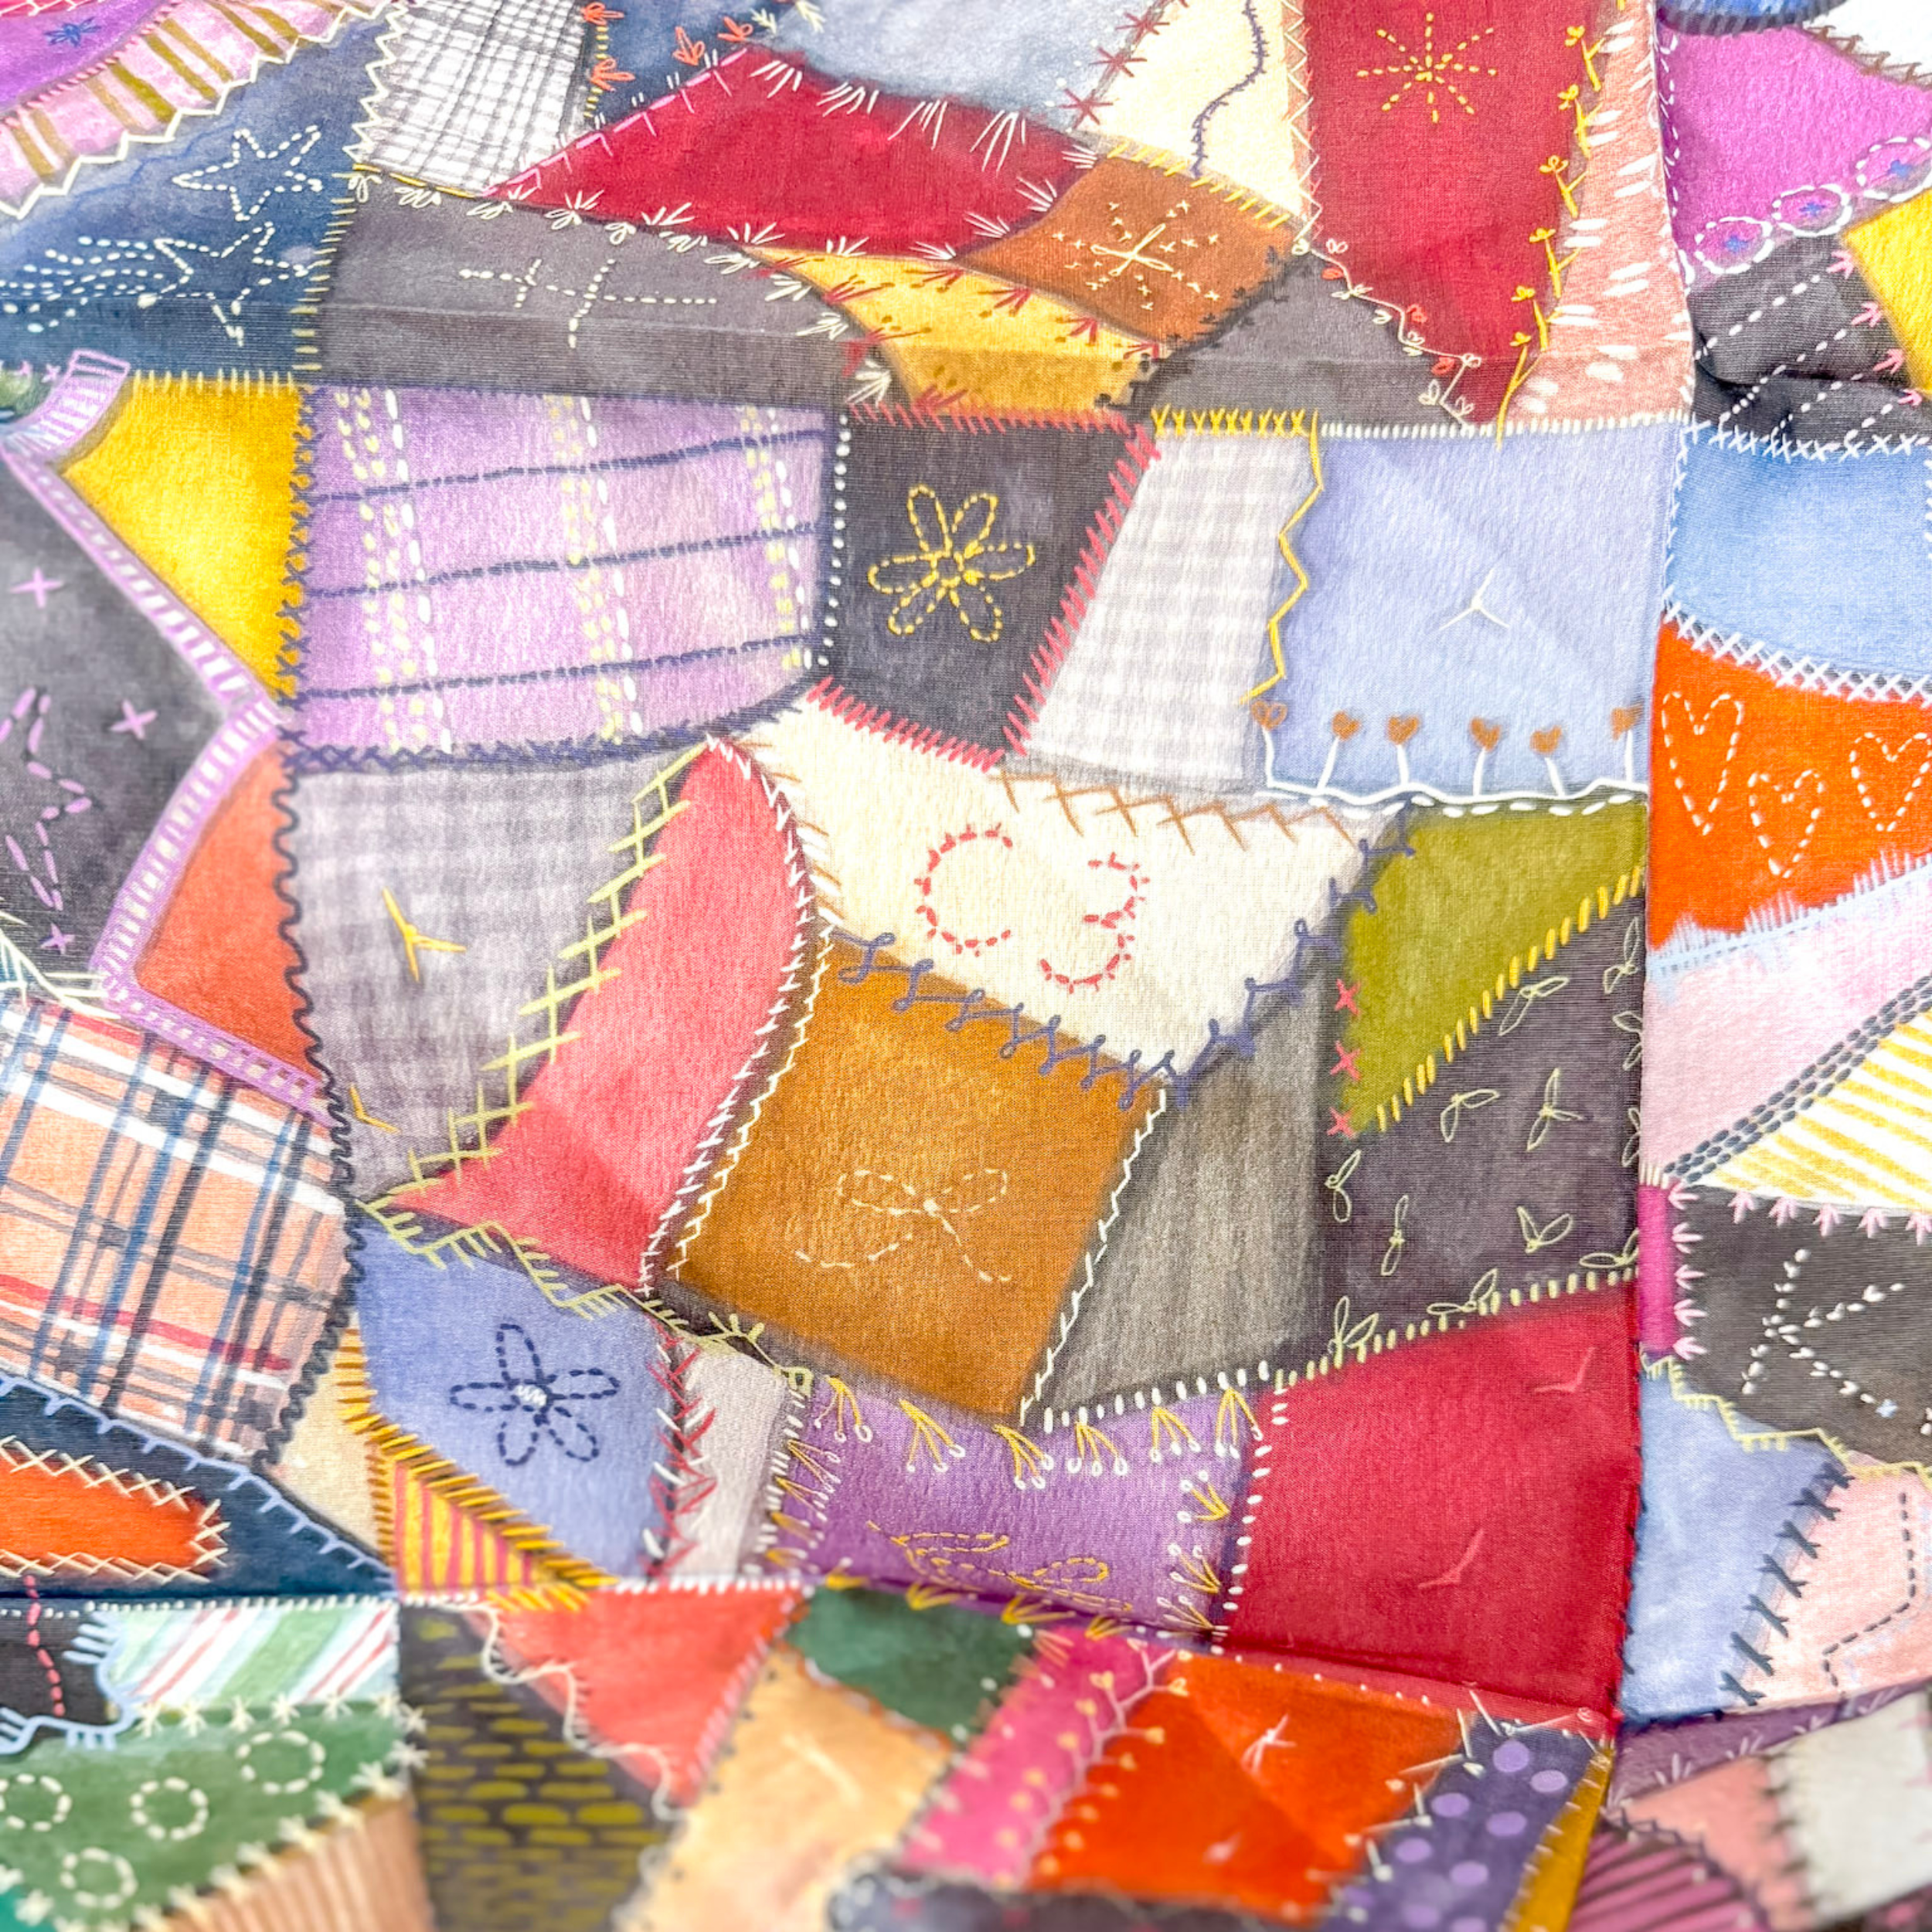 XOXO Art & Co | Crazy Quilt Shorty Wild Rag - Giddy Up Glamour Boutique